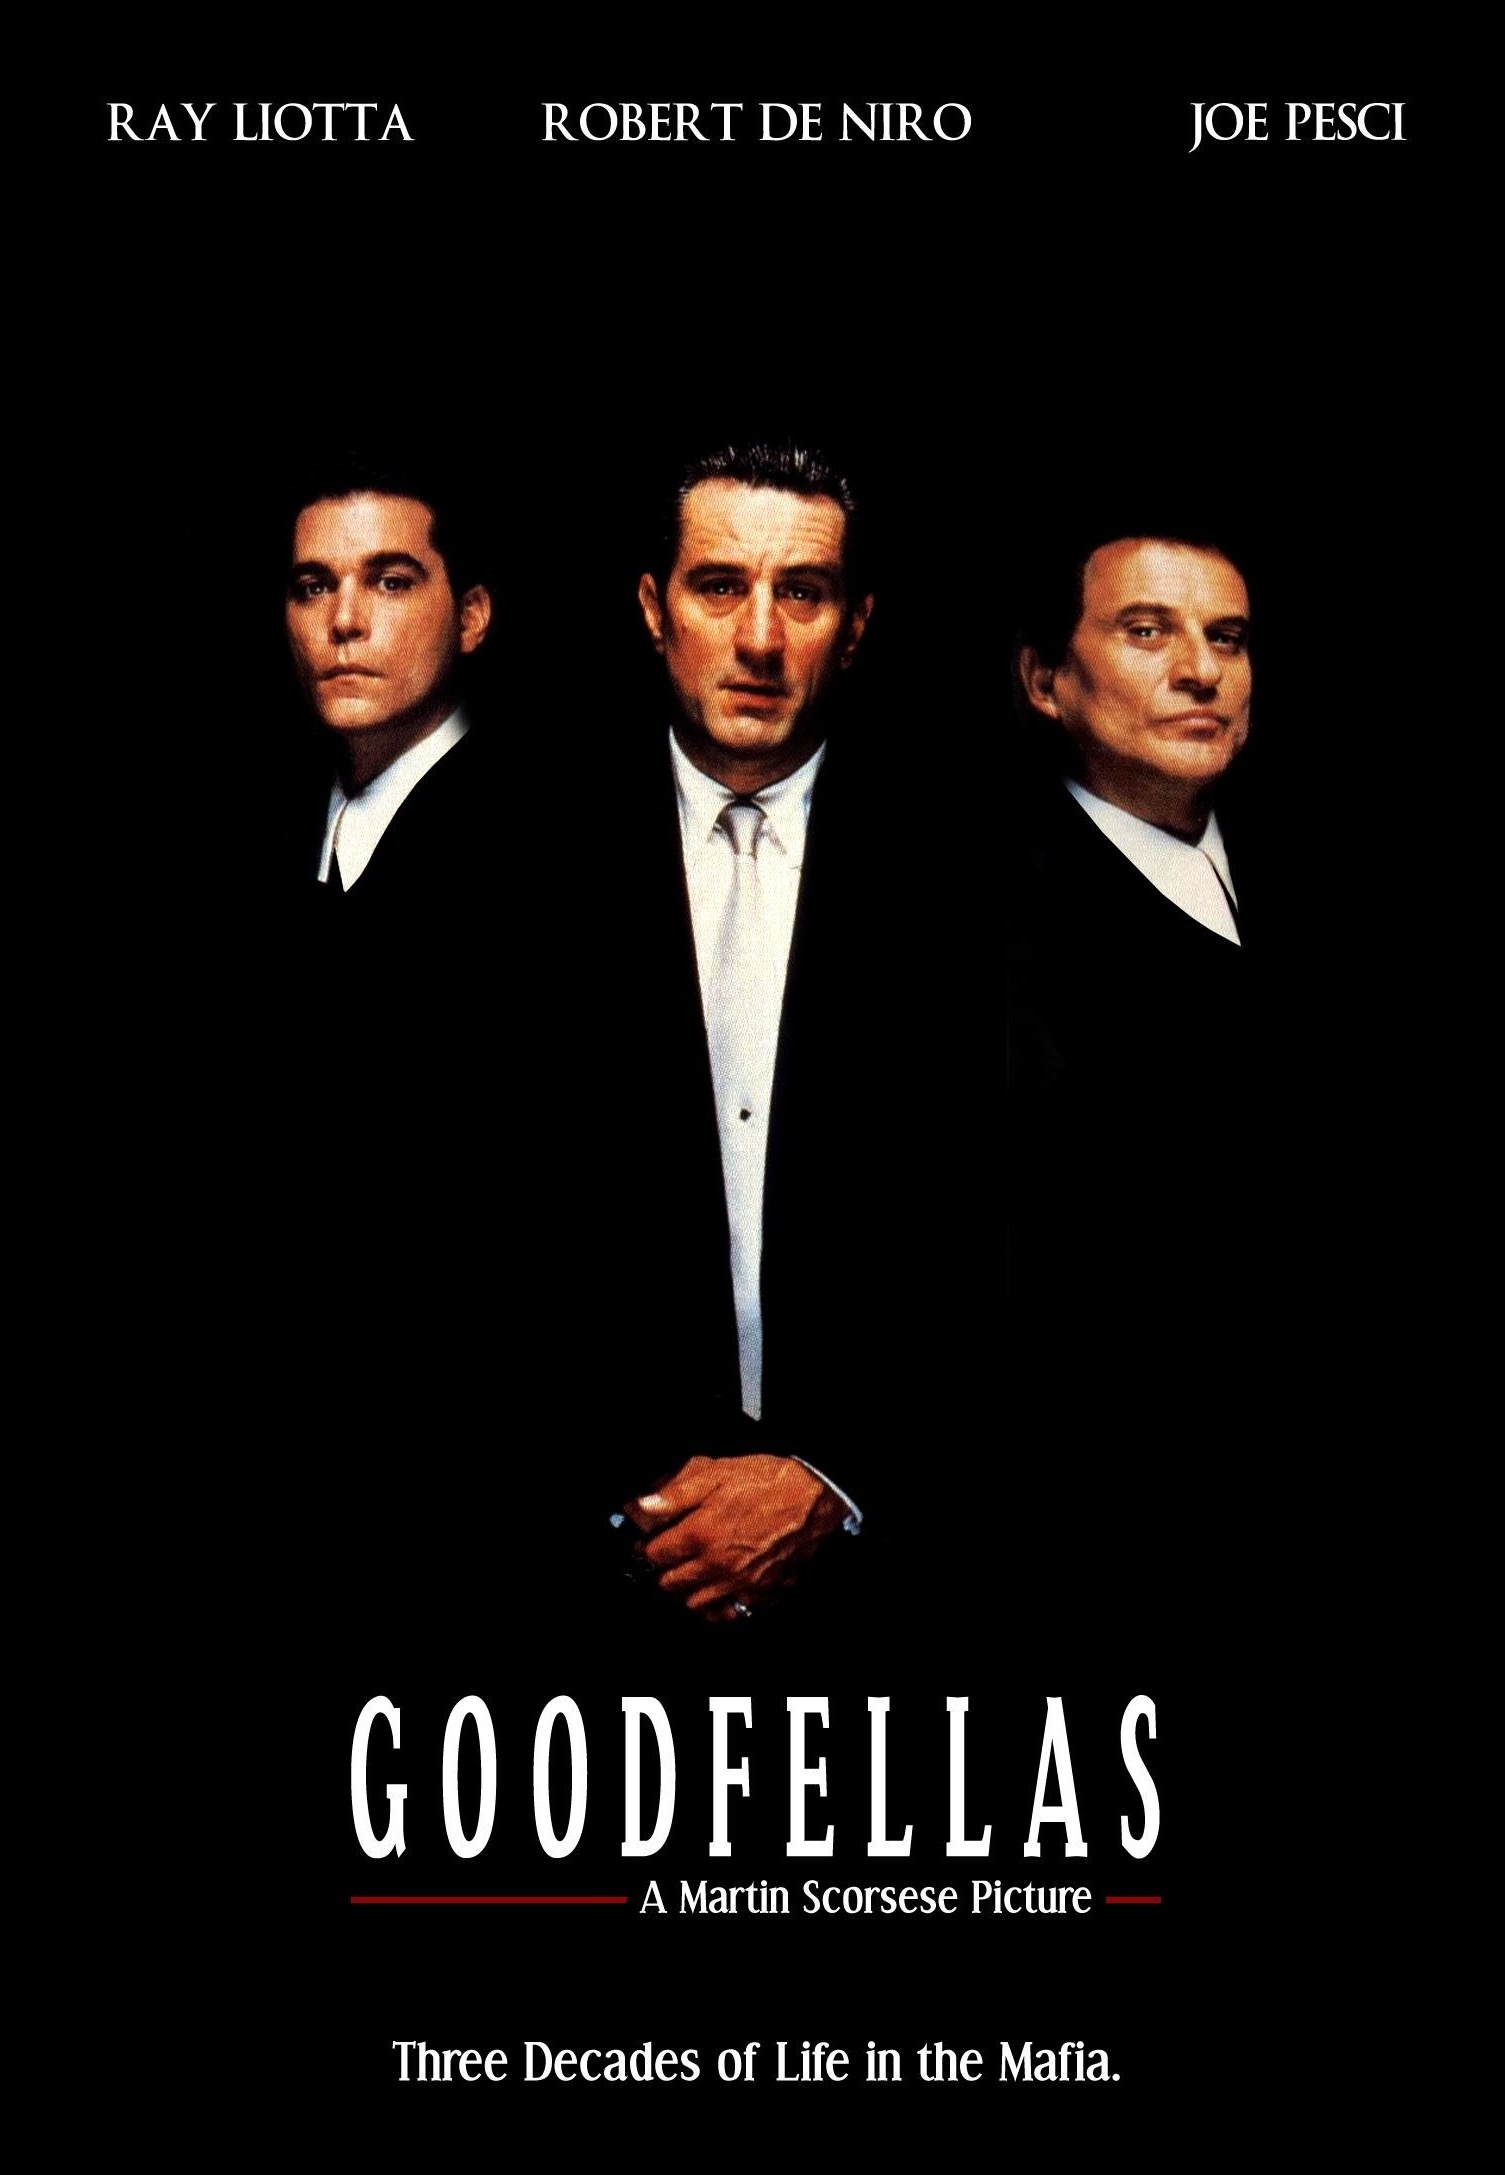 Quotes From The Movie Goodfellas. QuotesGram